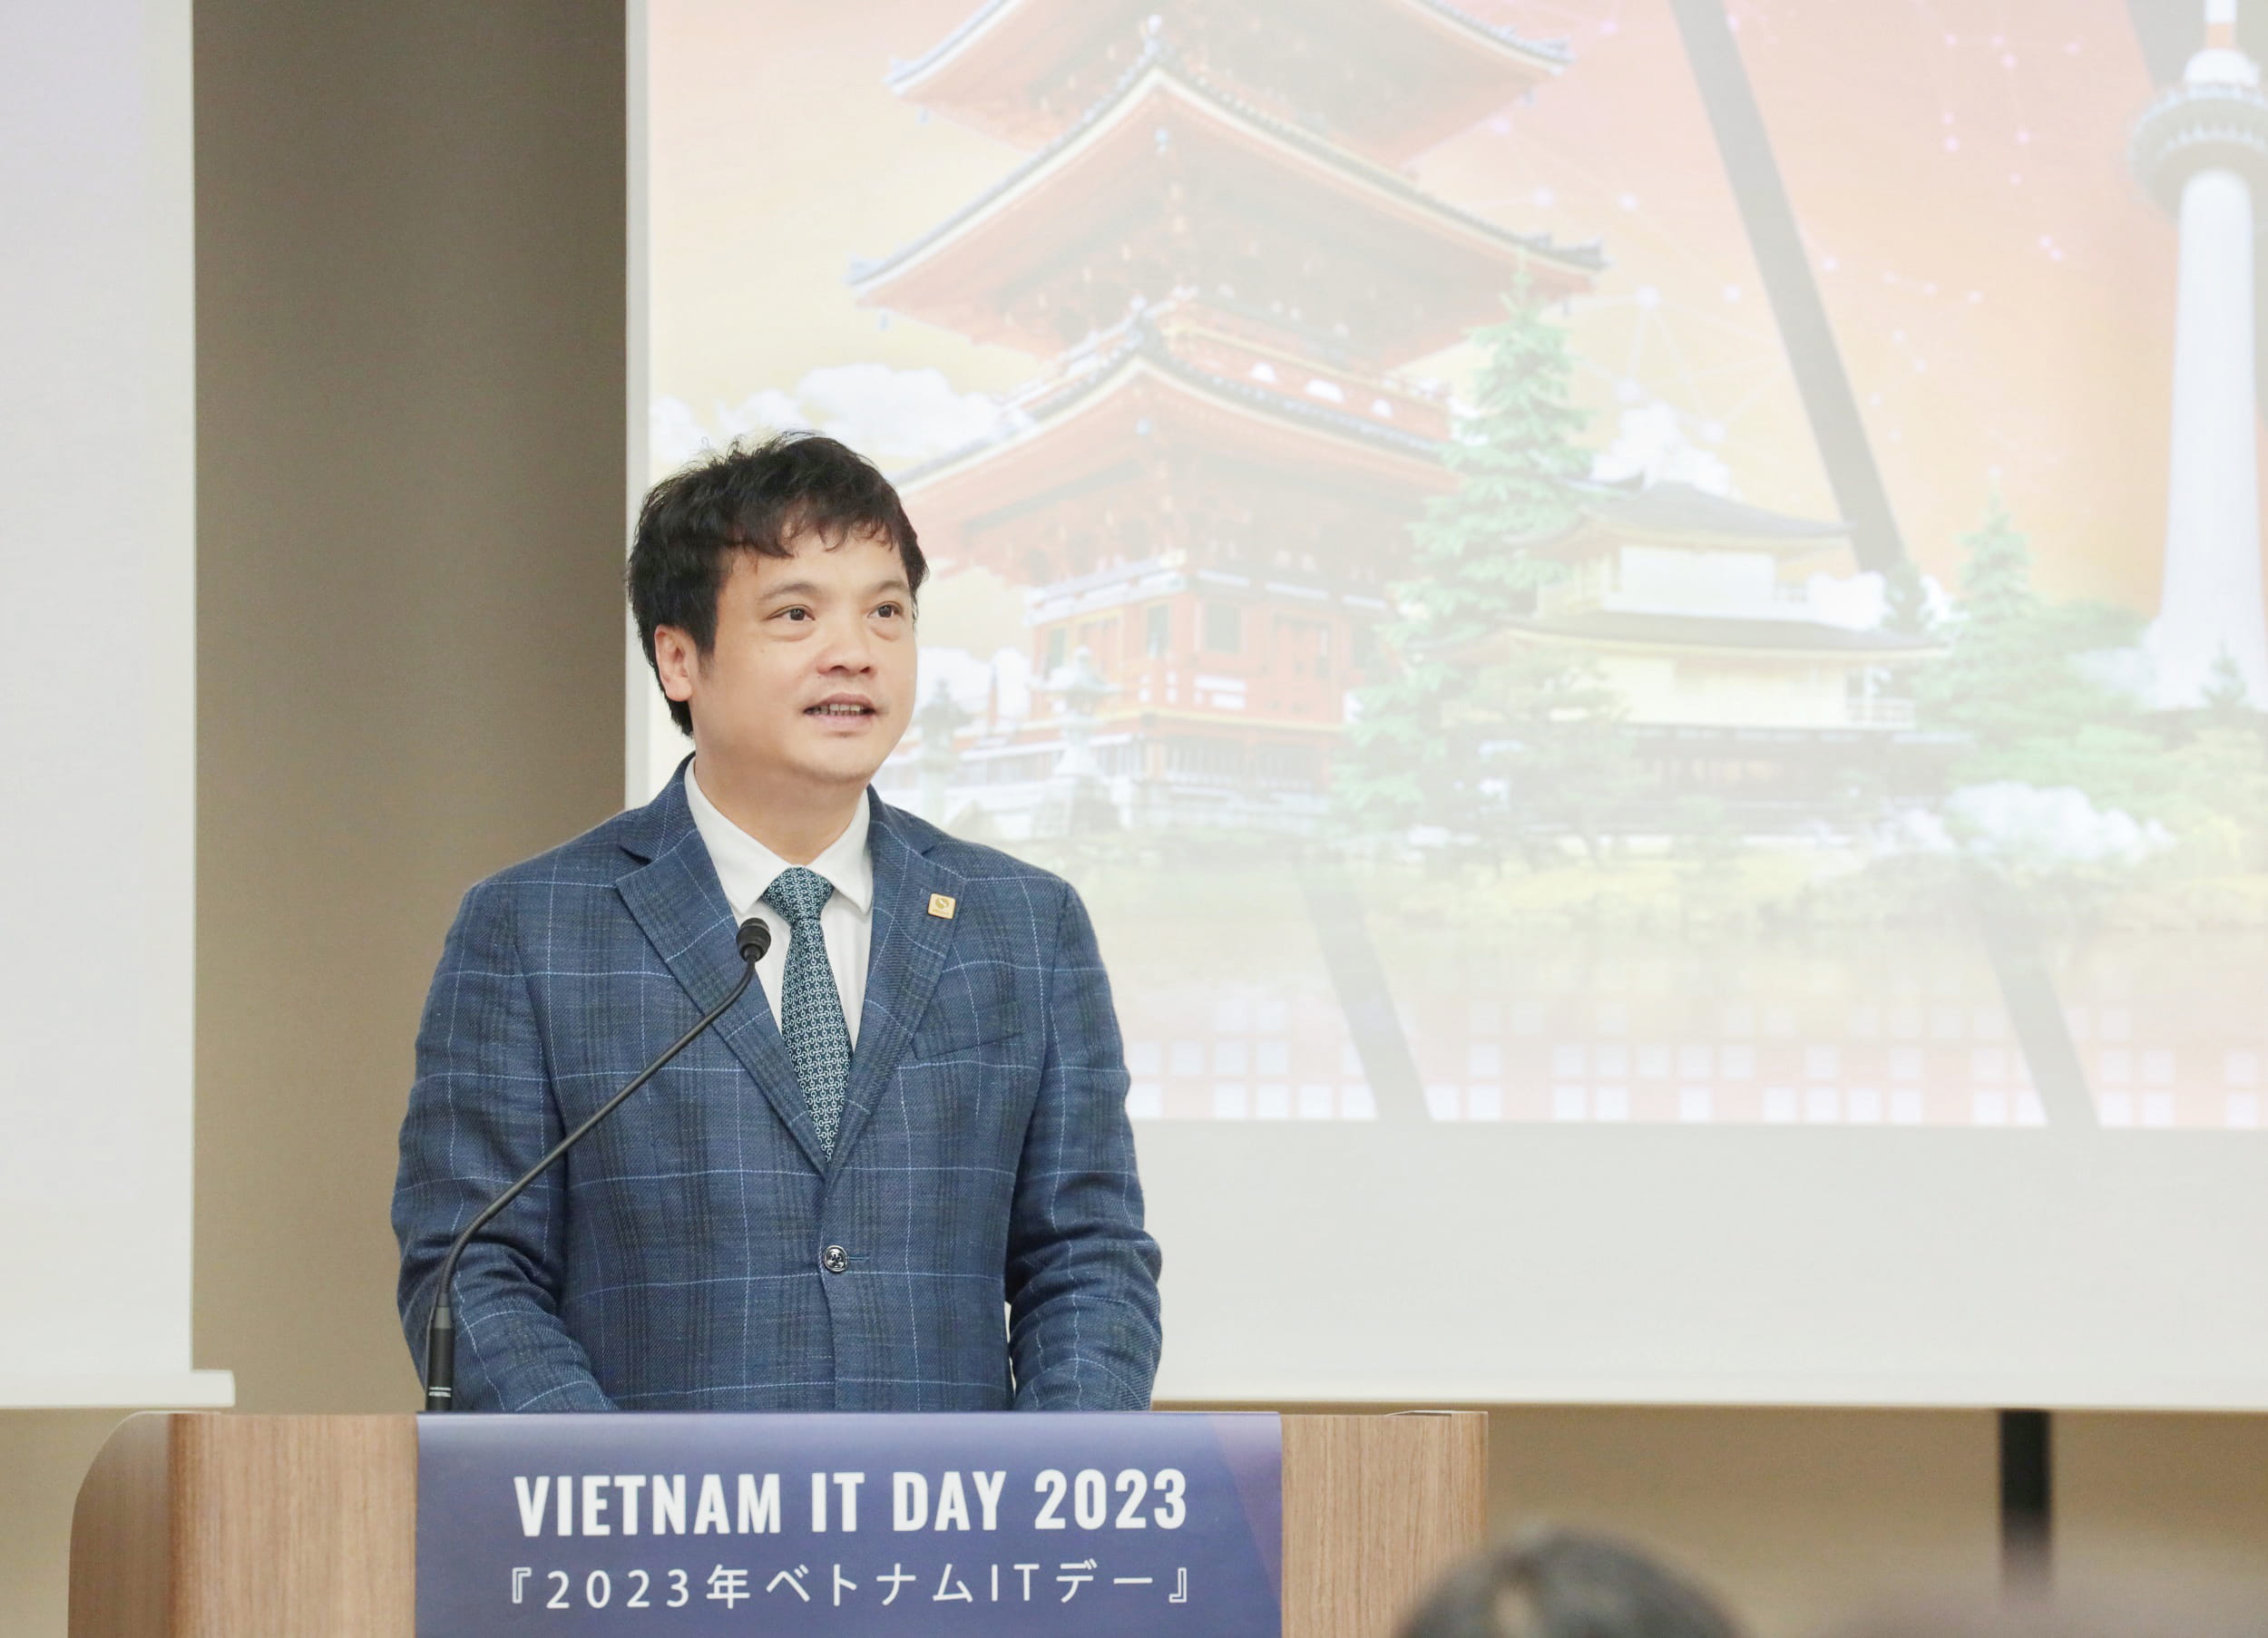 Mr. Nguyen Van Khoa delivered the opening speech at the Vietnam IT Day 2023 event.